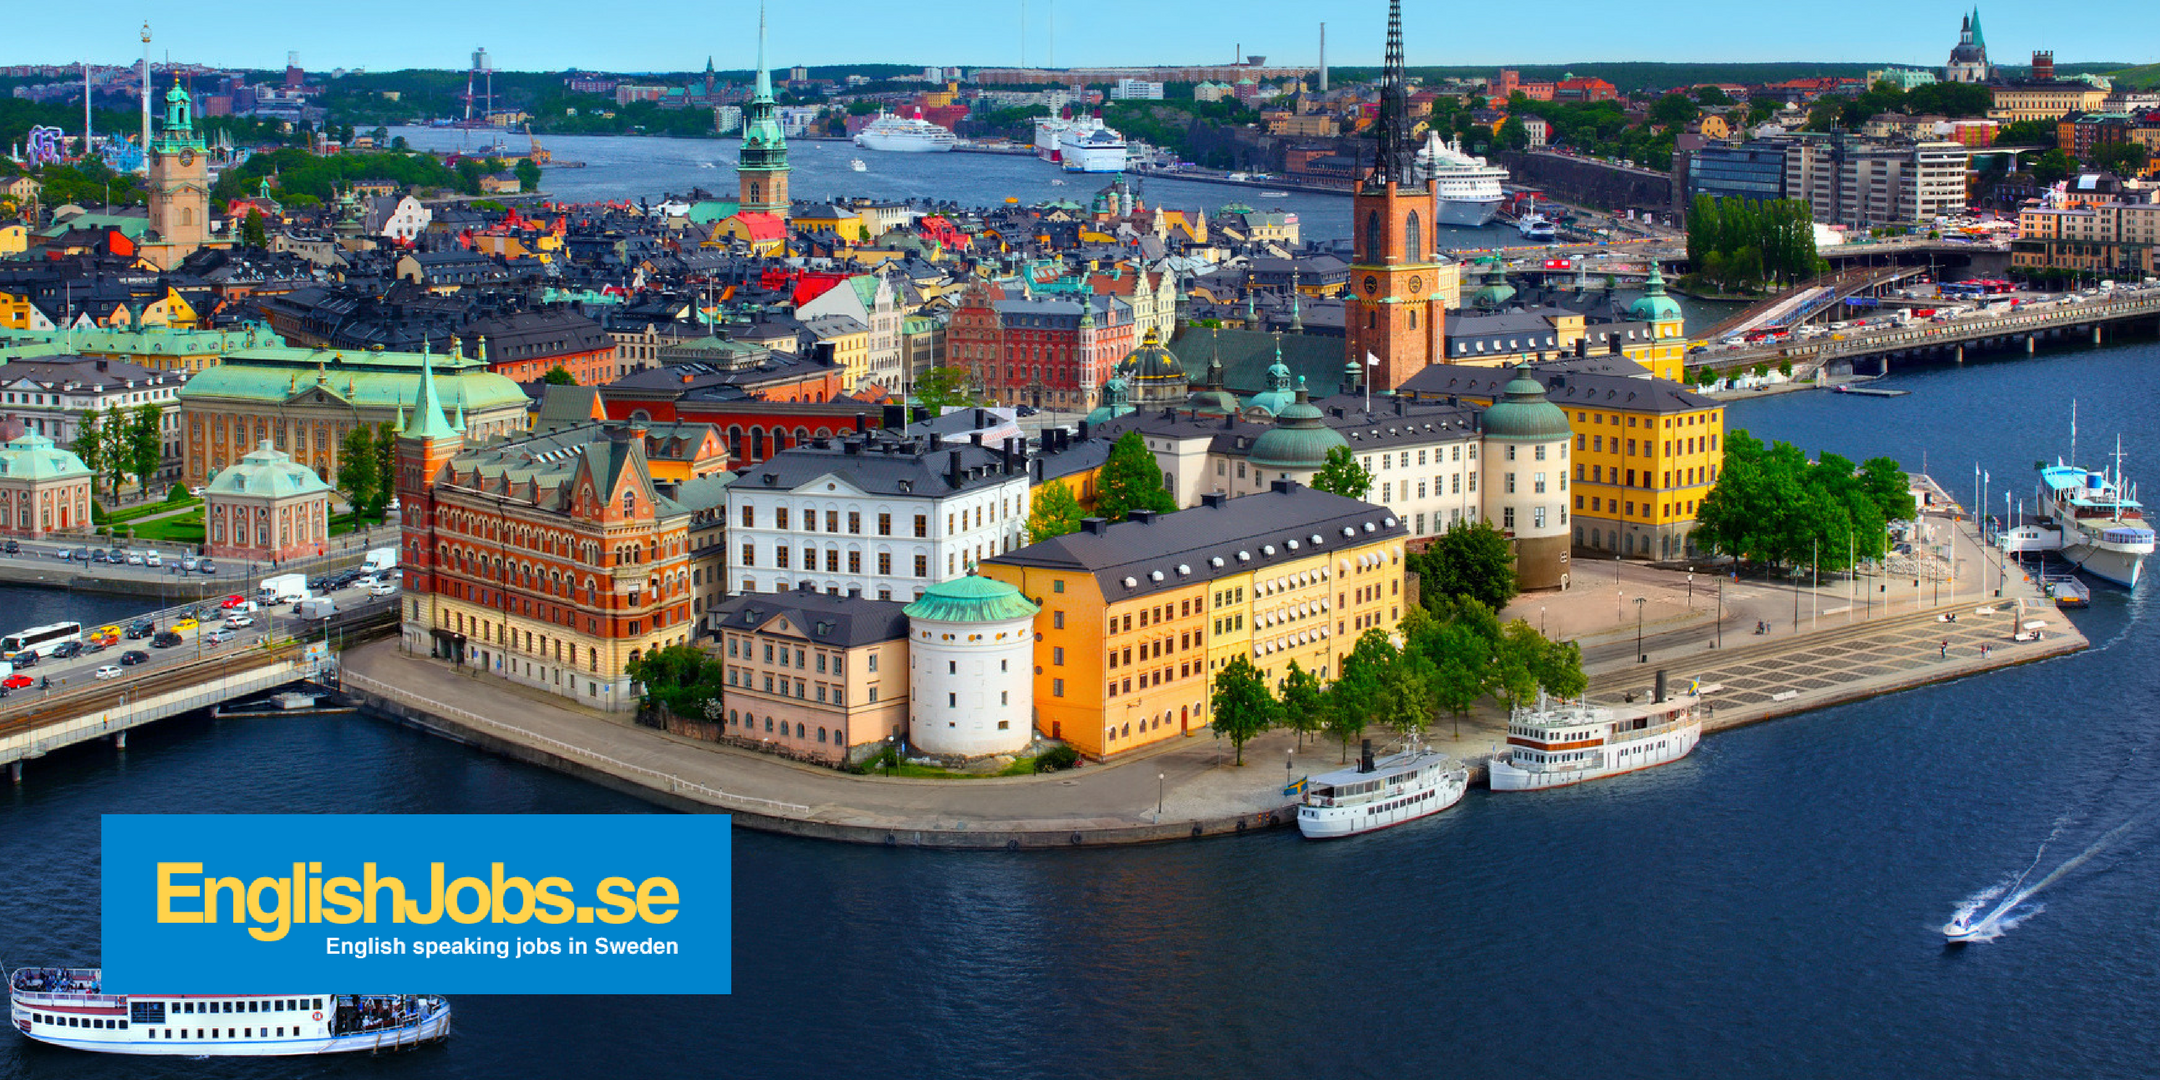 Work in Europe (Sweden, Denmark, Germany) - Your job search from Minneapolis to Stockholm